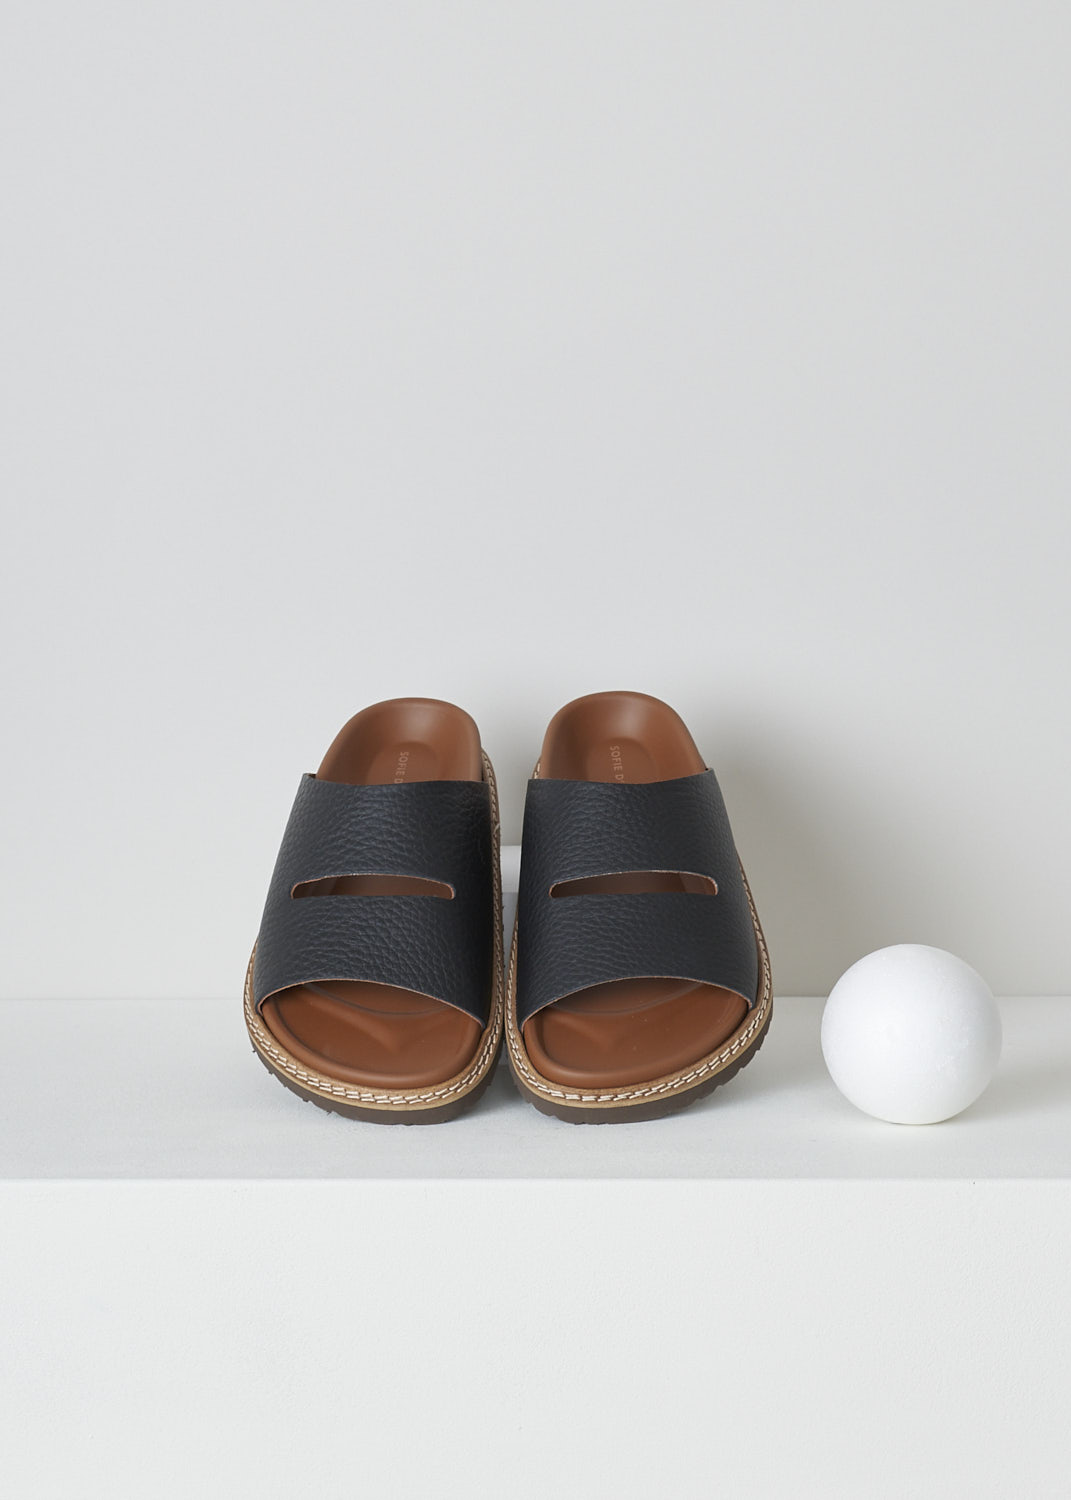 SOFIE Dâ€™HOORE, FABIA SLIP-ON SANDALS IN BLACK, FABIA_LNAT_BLACK, Black, Top, These slip-on sandals in the black have a wide footbed with stitching along the soles. A broad strap with a horizontal cut-out goes across the vamp. These sandals have a round open-toe.
